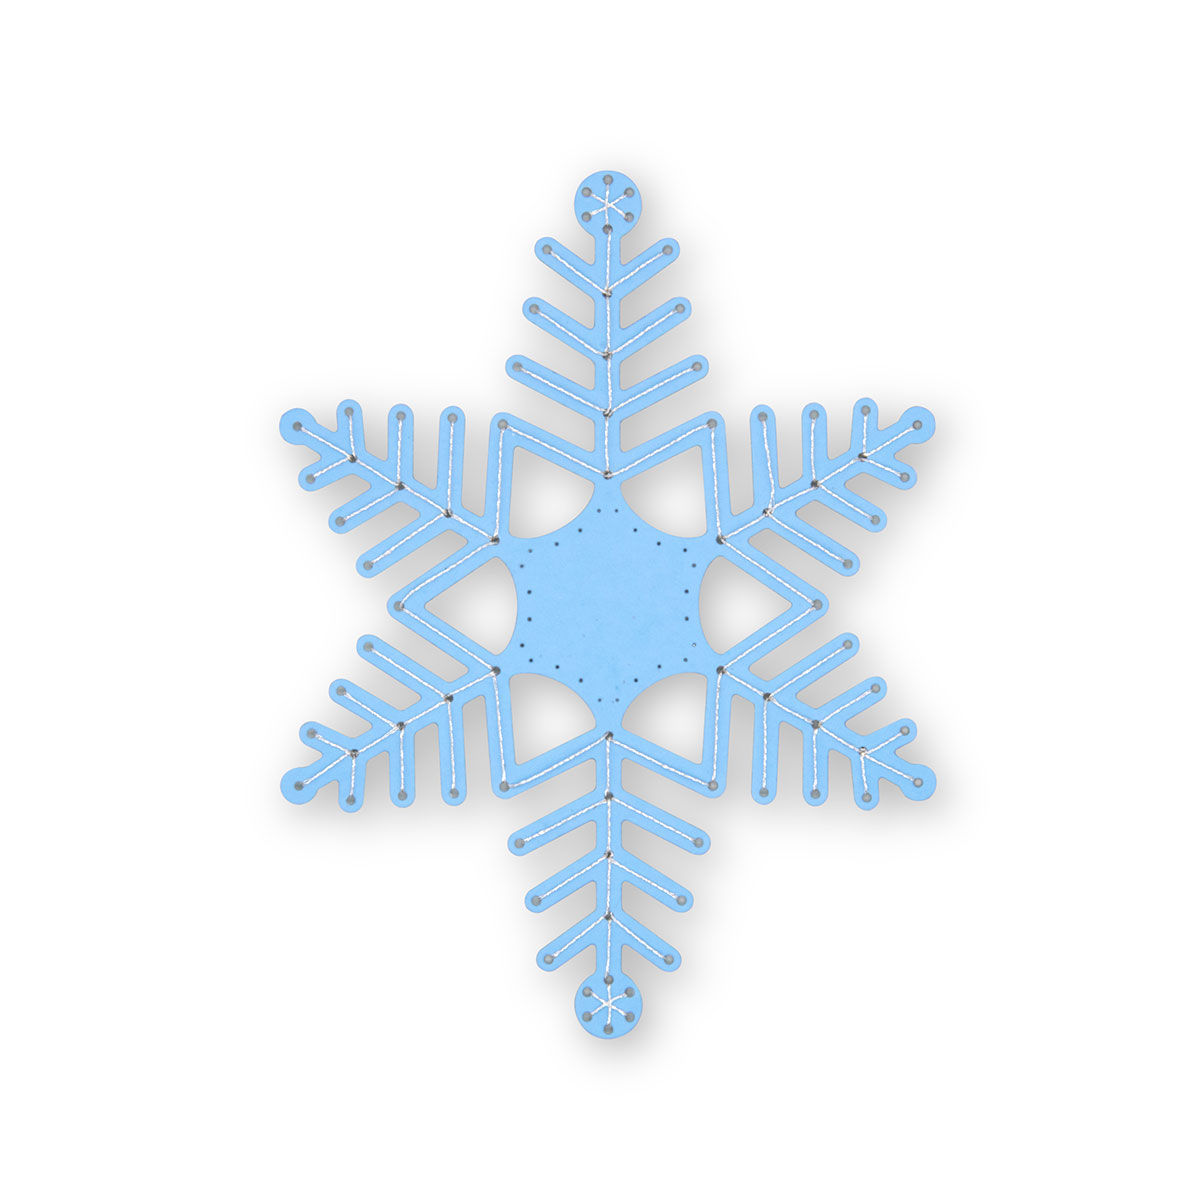 Playside Creations Snowflakes Foam Stickers - Large Blue, White, and Silver  Snowflake Cutouts for Crafts, Scrapbooks, Cards - Glitter and Matte